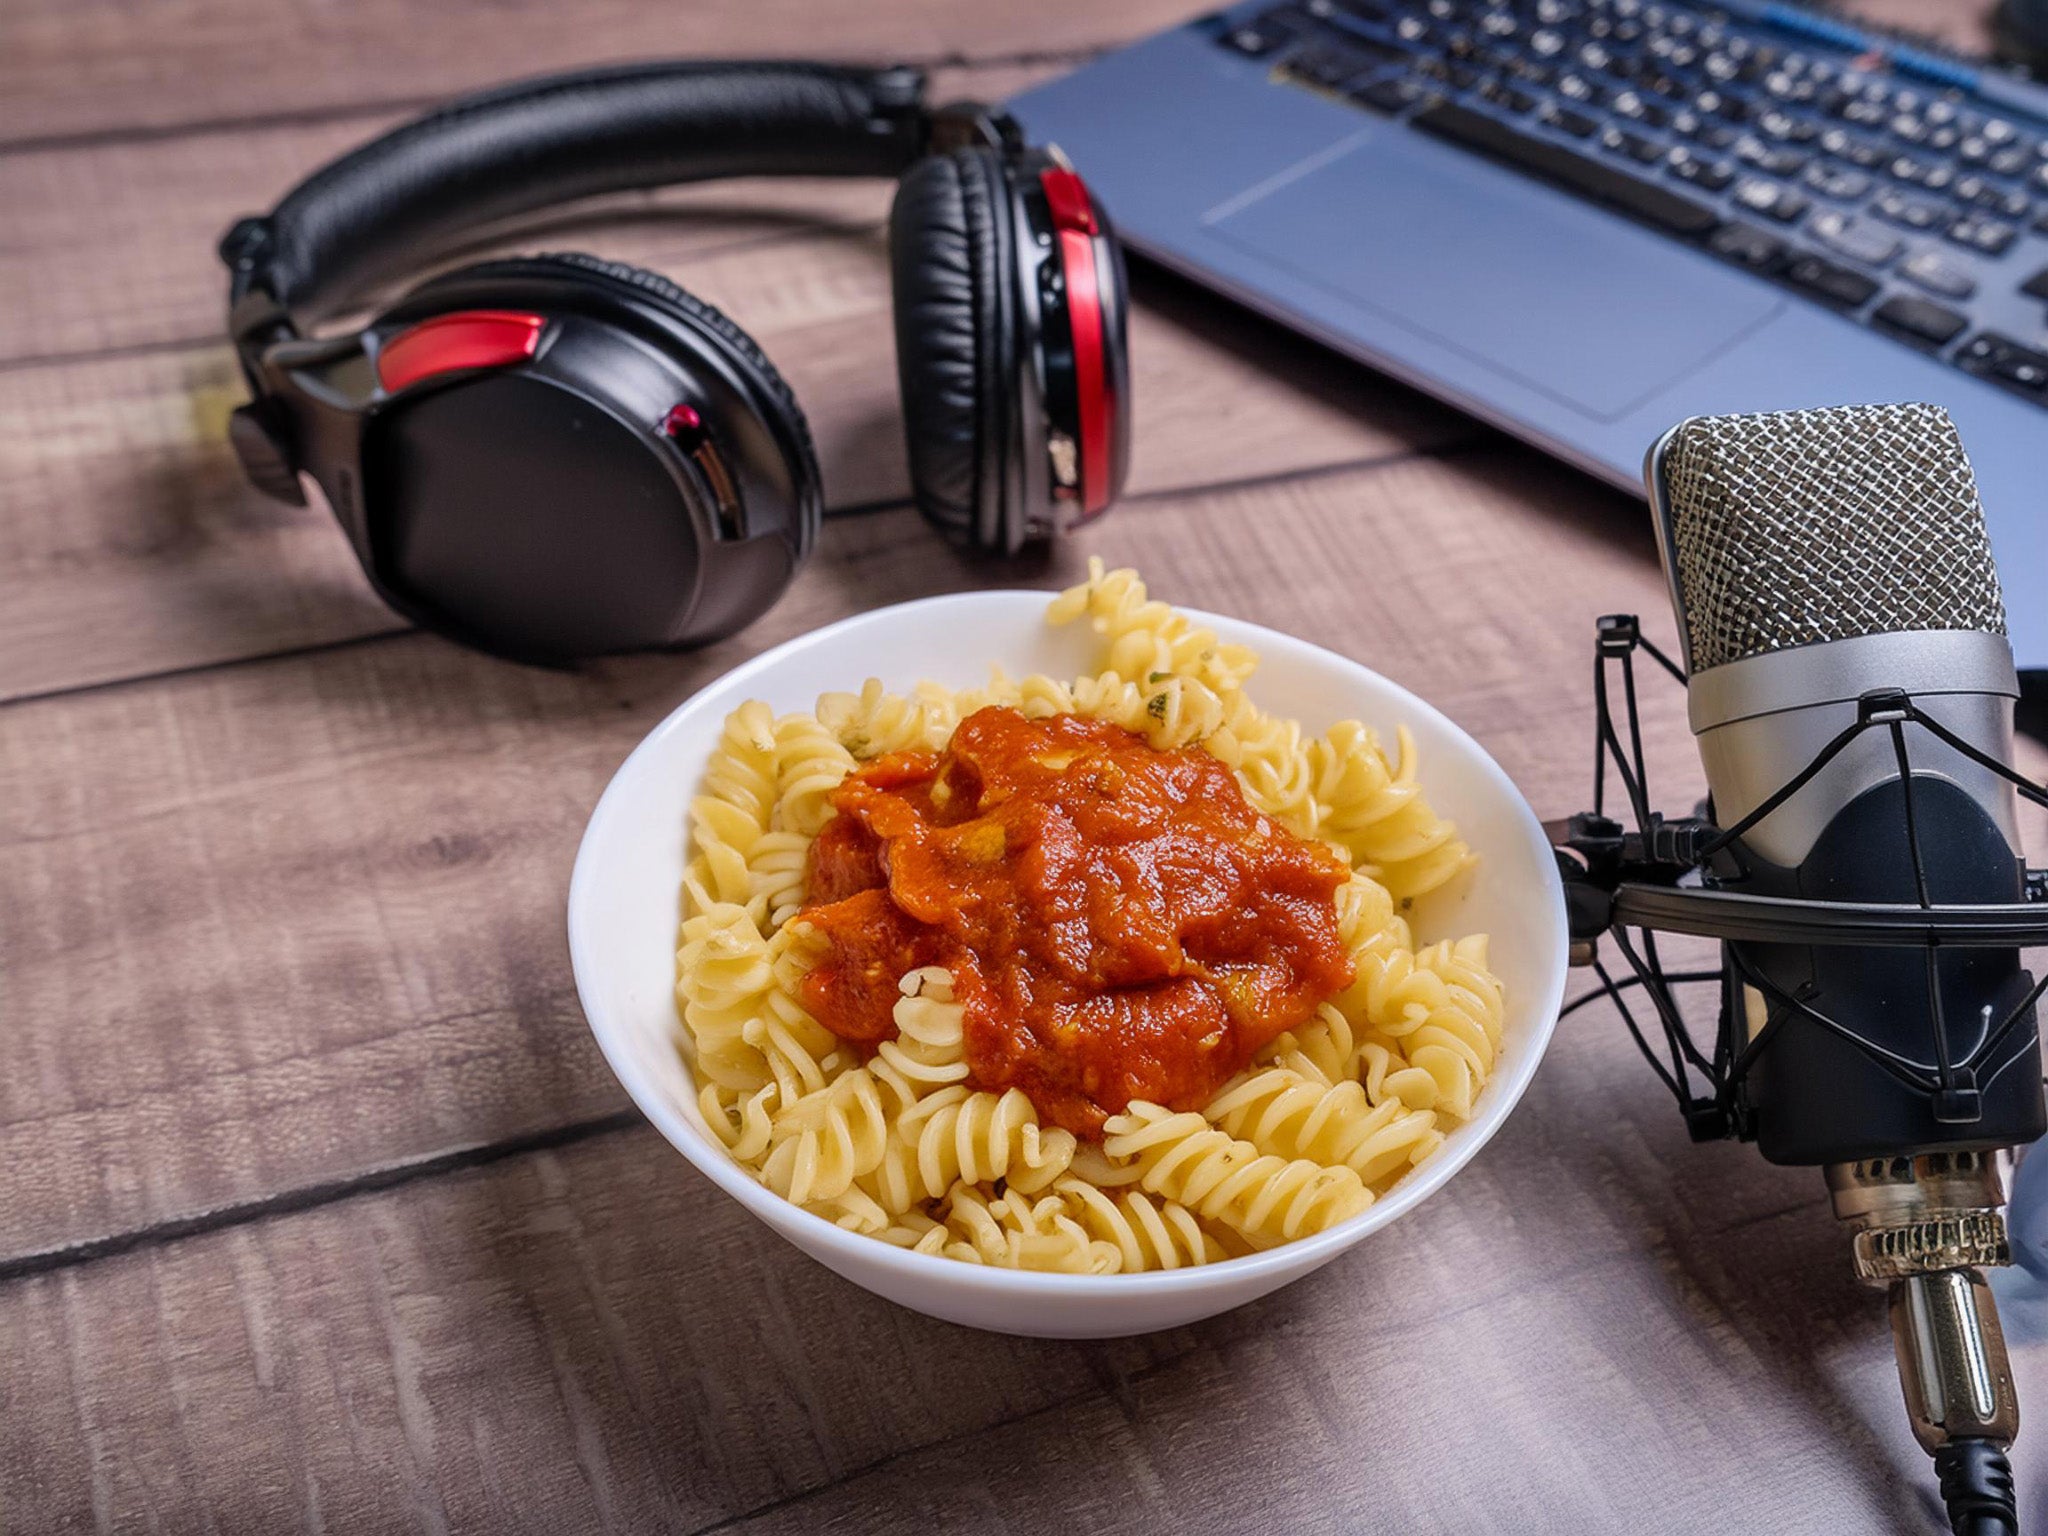 This image of a bowl of spiral pasta next to headphones and a microphone generated entirely by AI. 